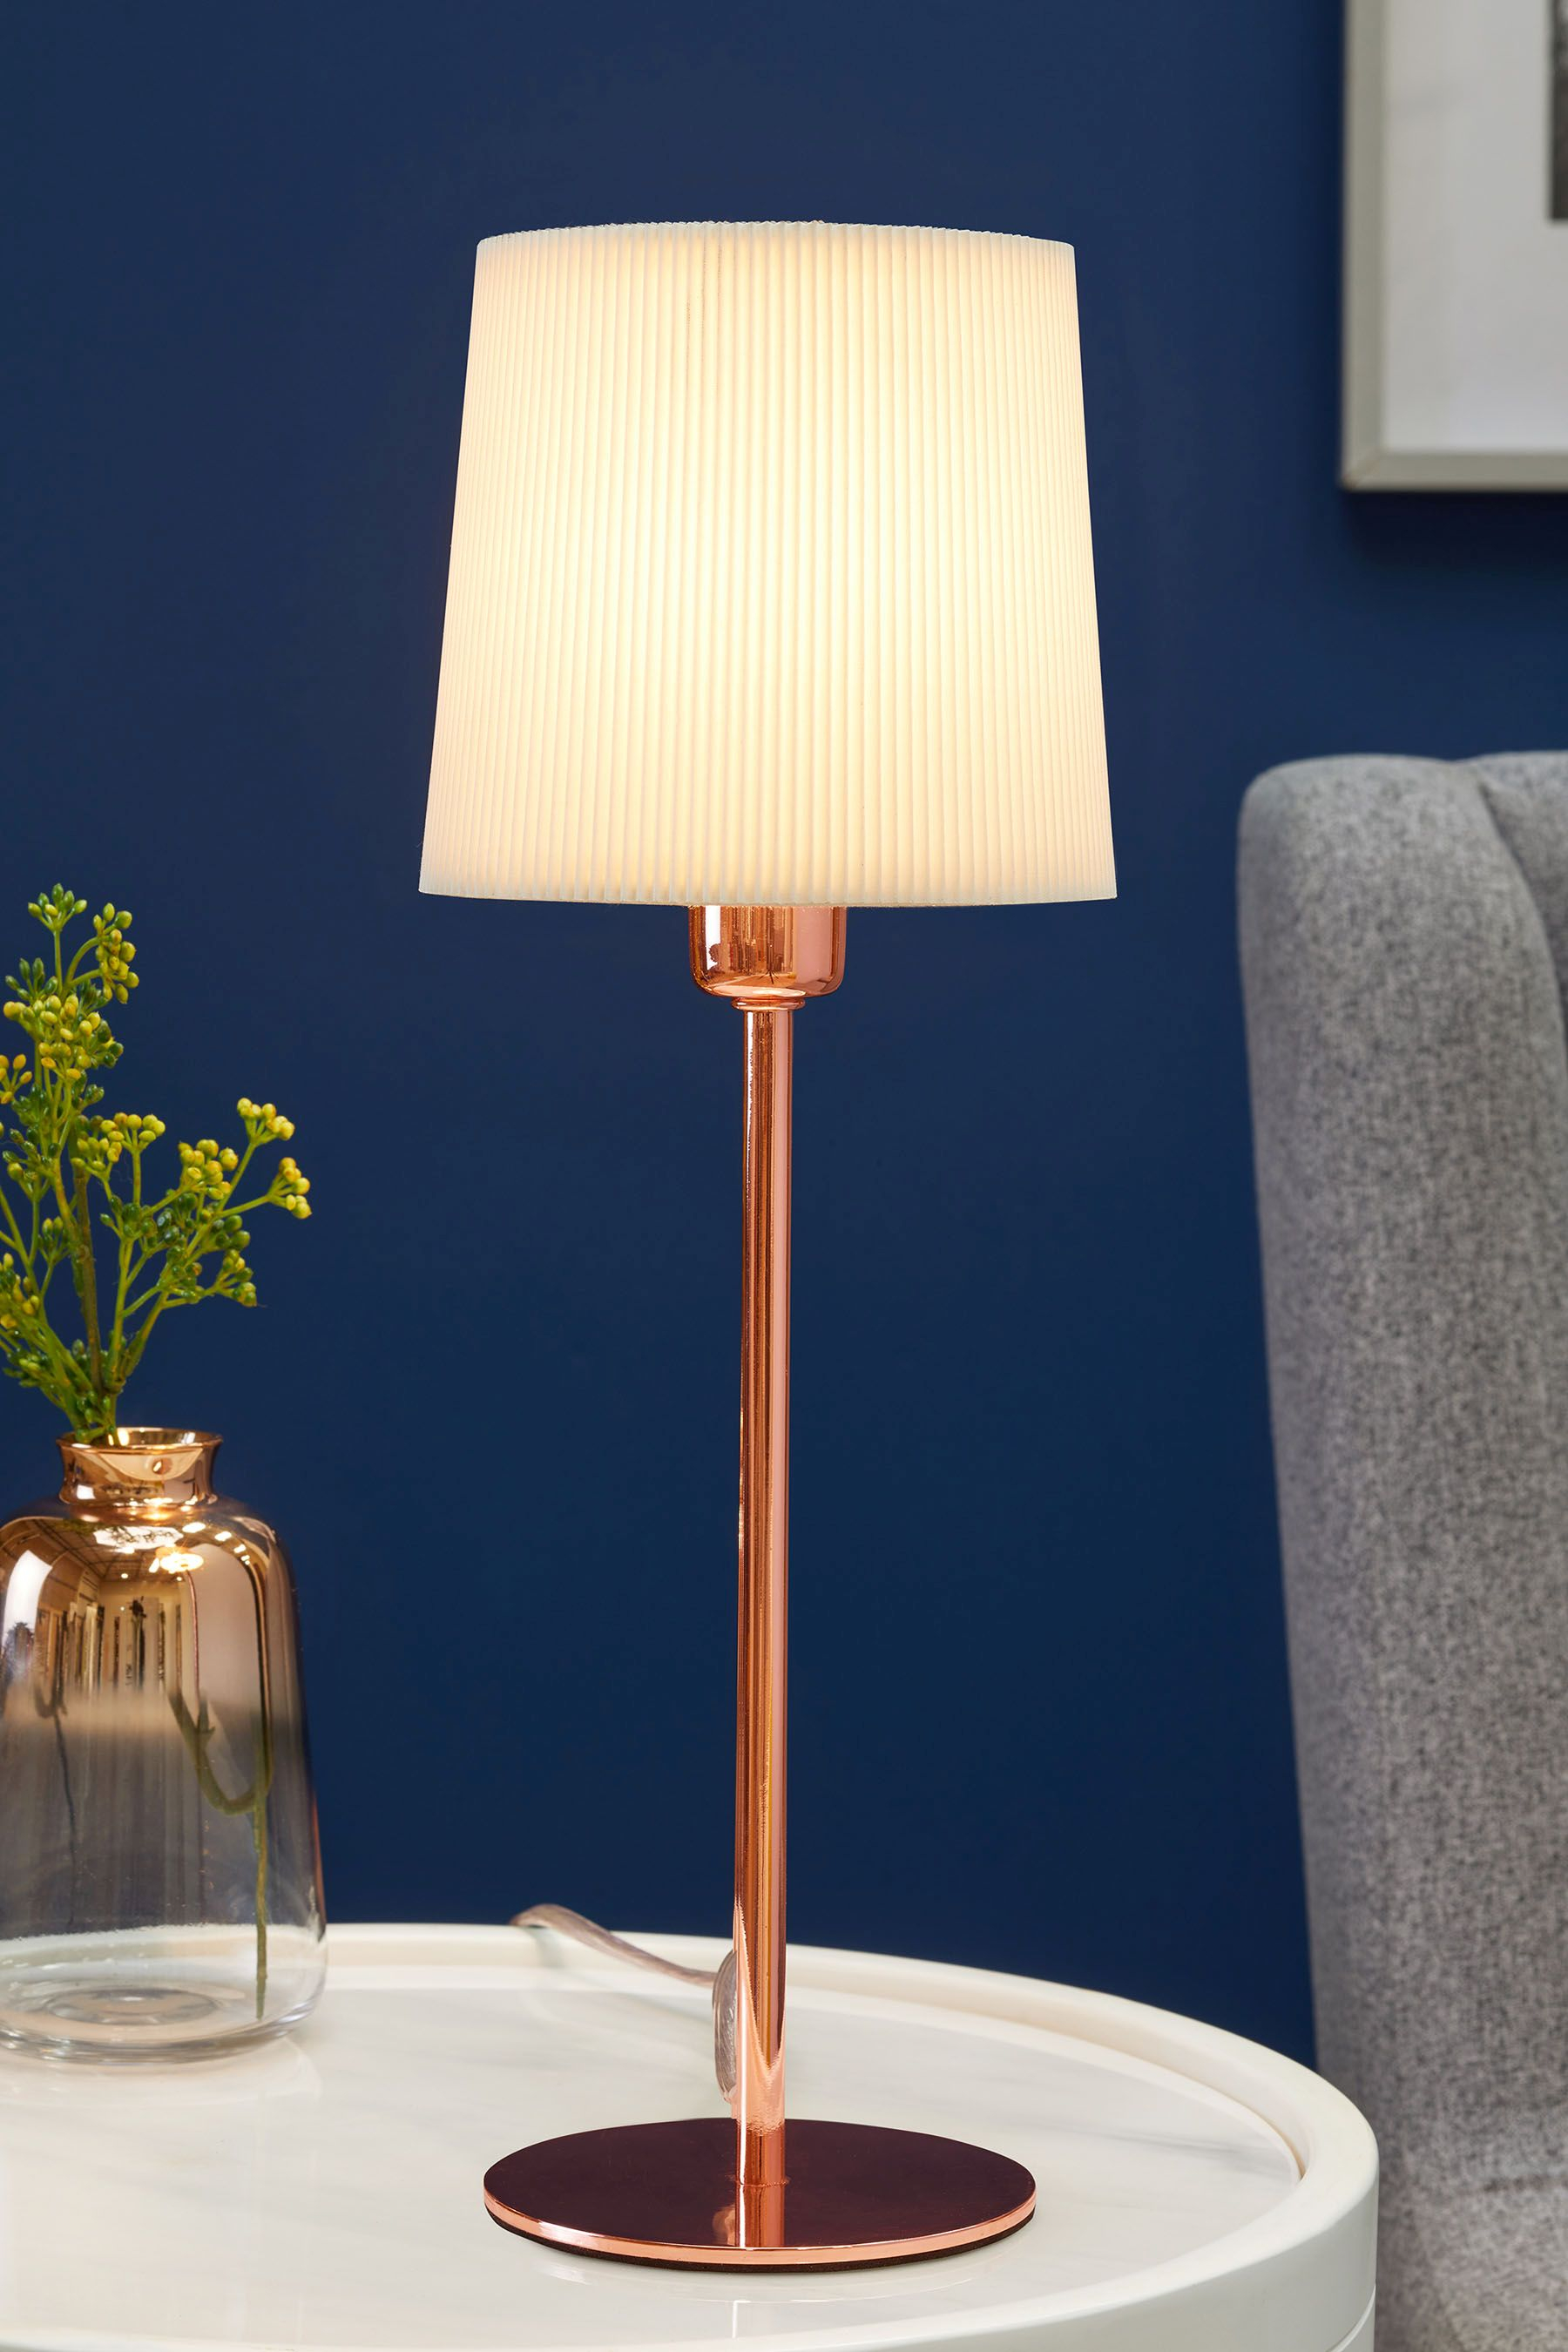 Next Kira Table Lamp Copper Products Bedside Table with proportions 1800 X 2700